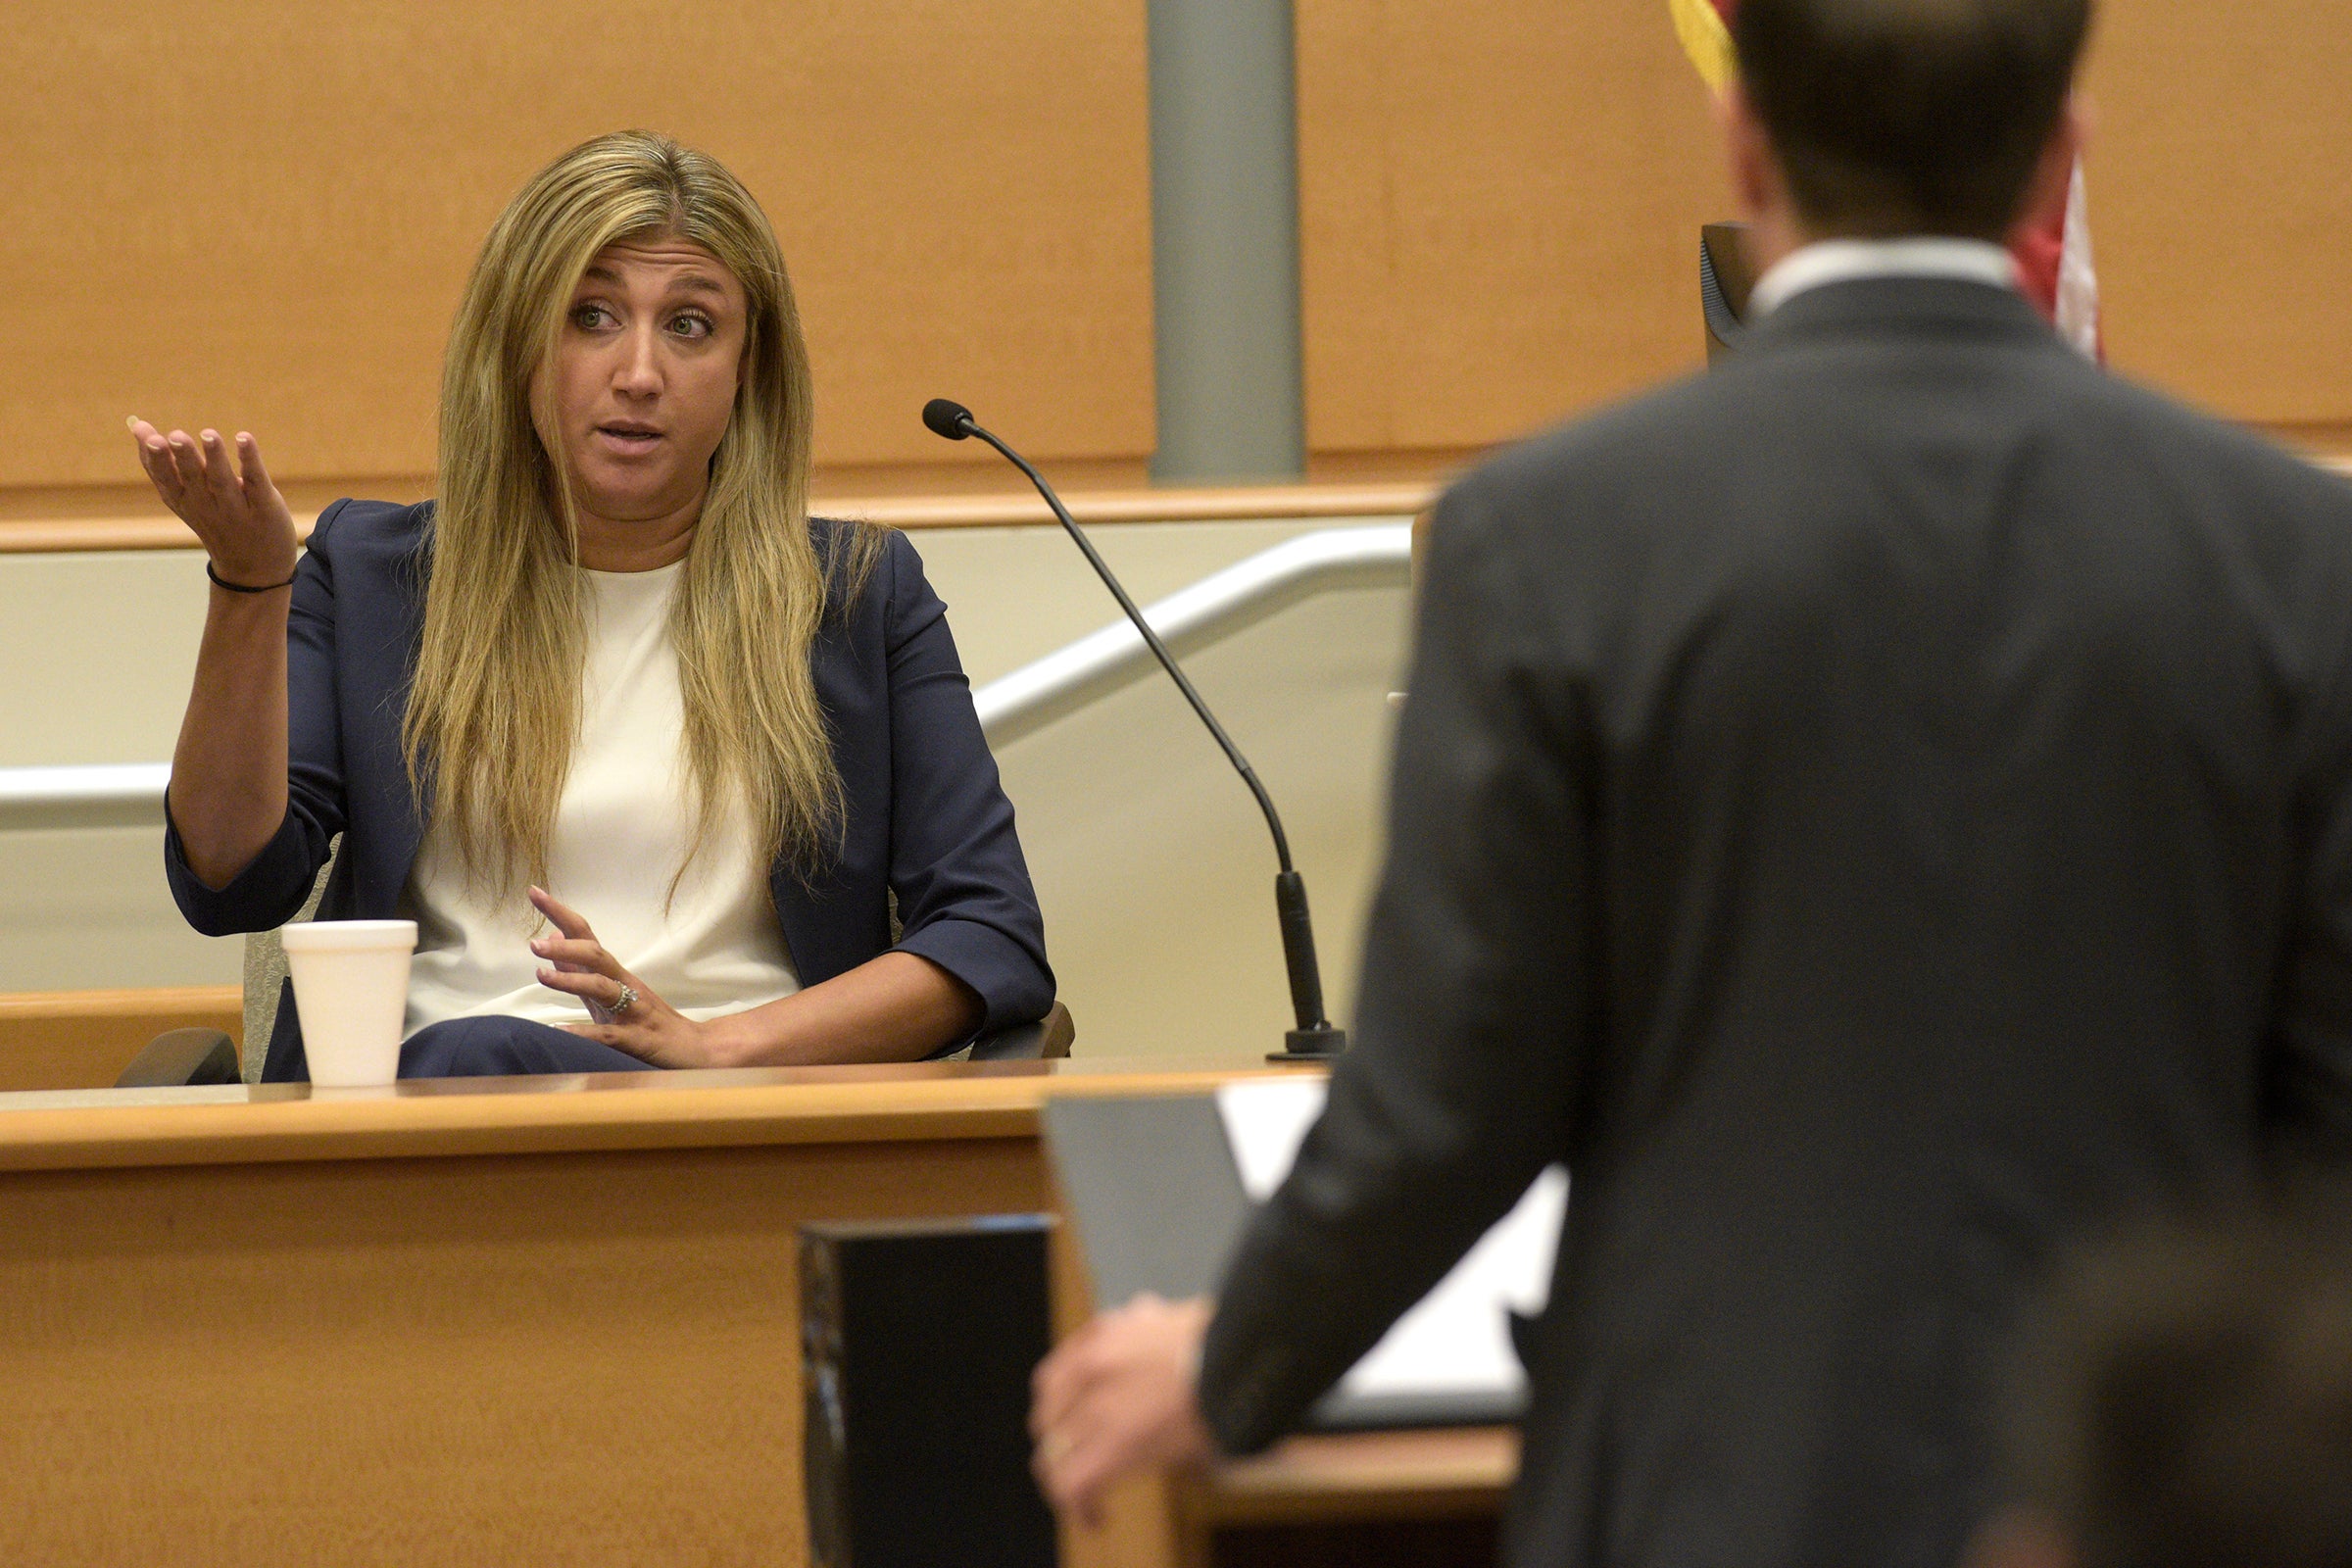 Brittany Paz, a lawyer hired by Alex Jones to testify about his companies, is questioned by plaintiff's attorney Chris Mattei during Jones' Sandy Hook defamation damages trial